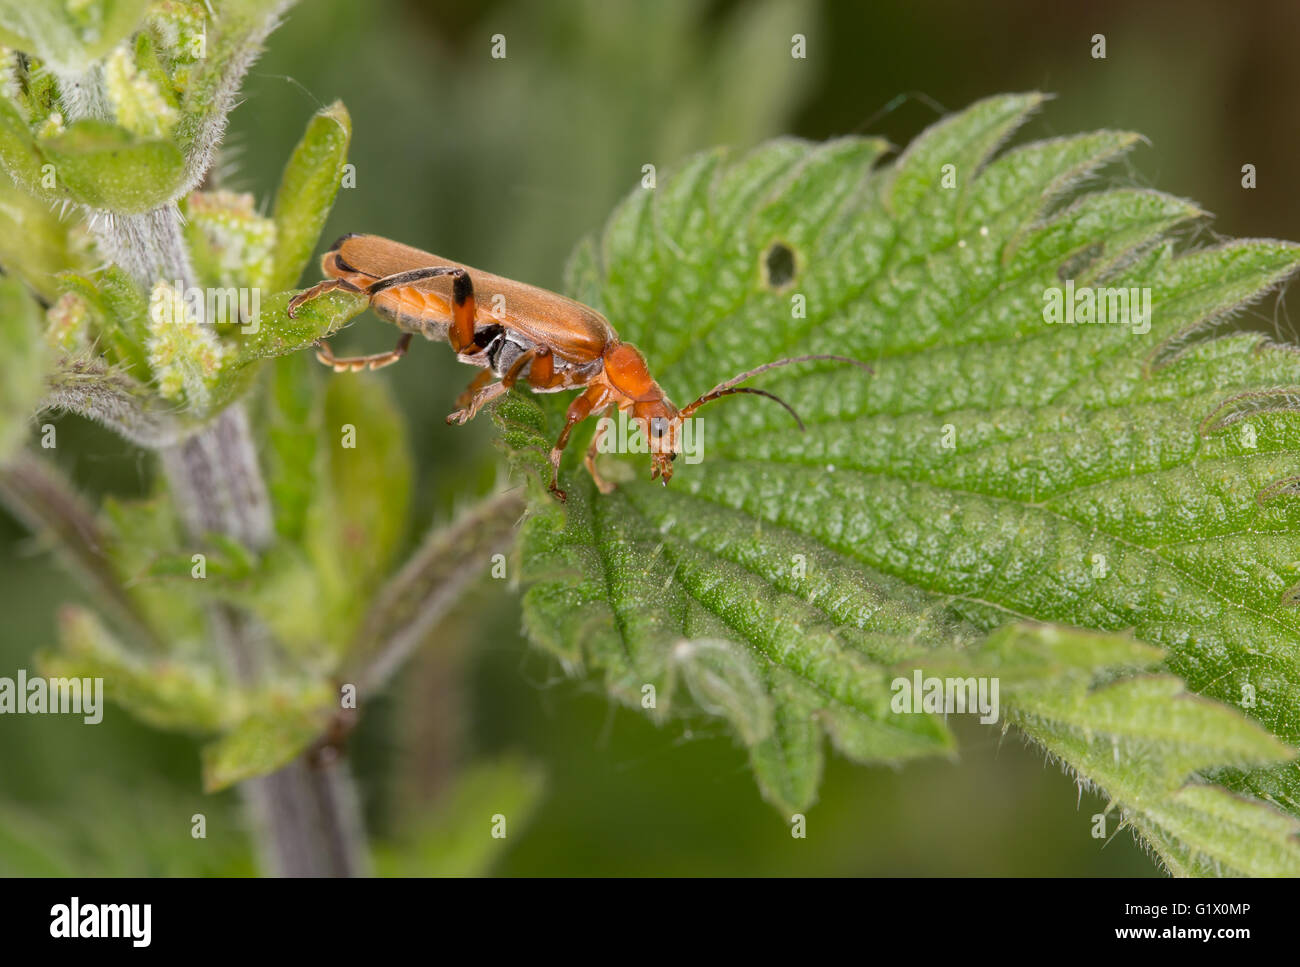 Soldier Beetle, Cantharis livida, Looking for prey Stock Photo